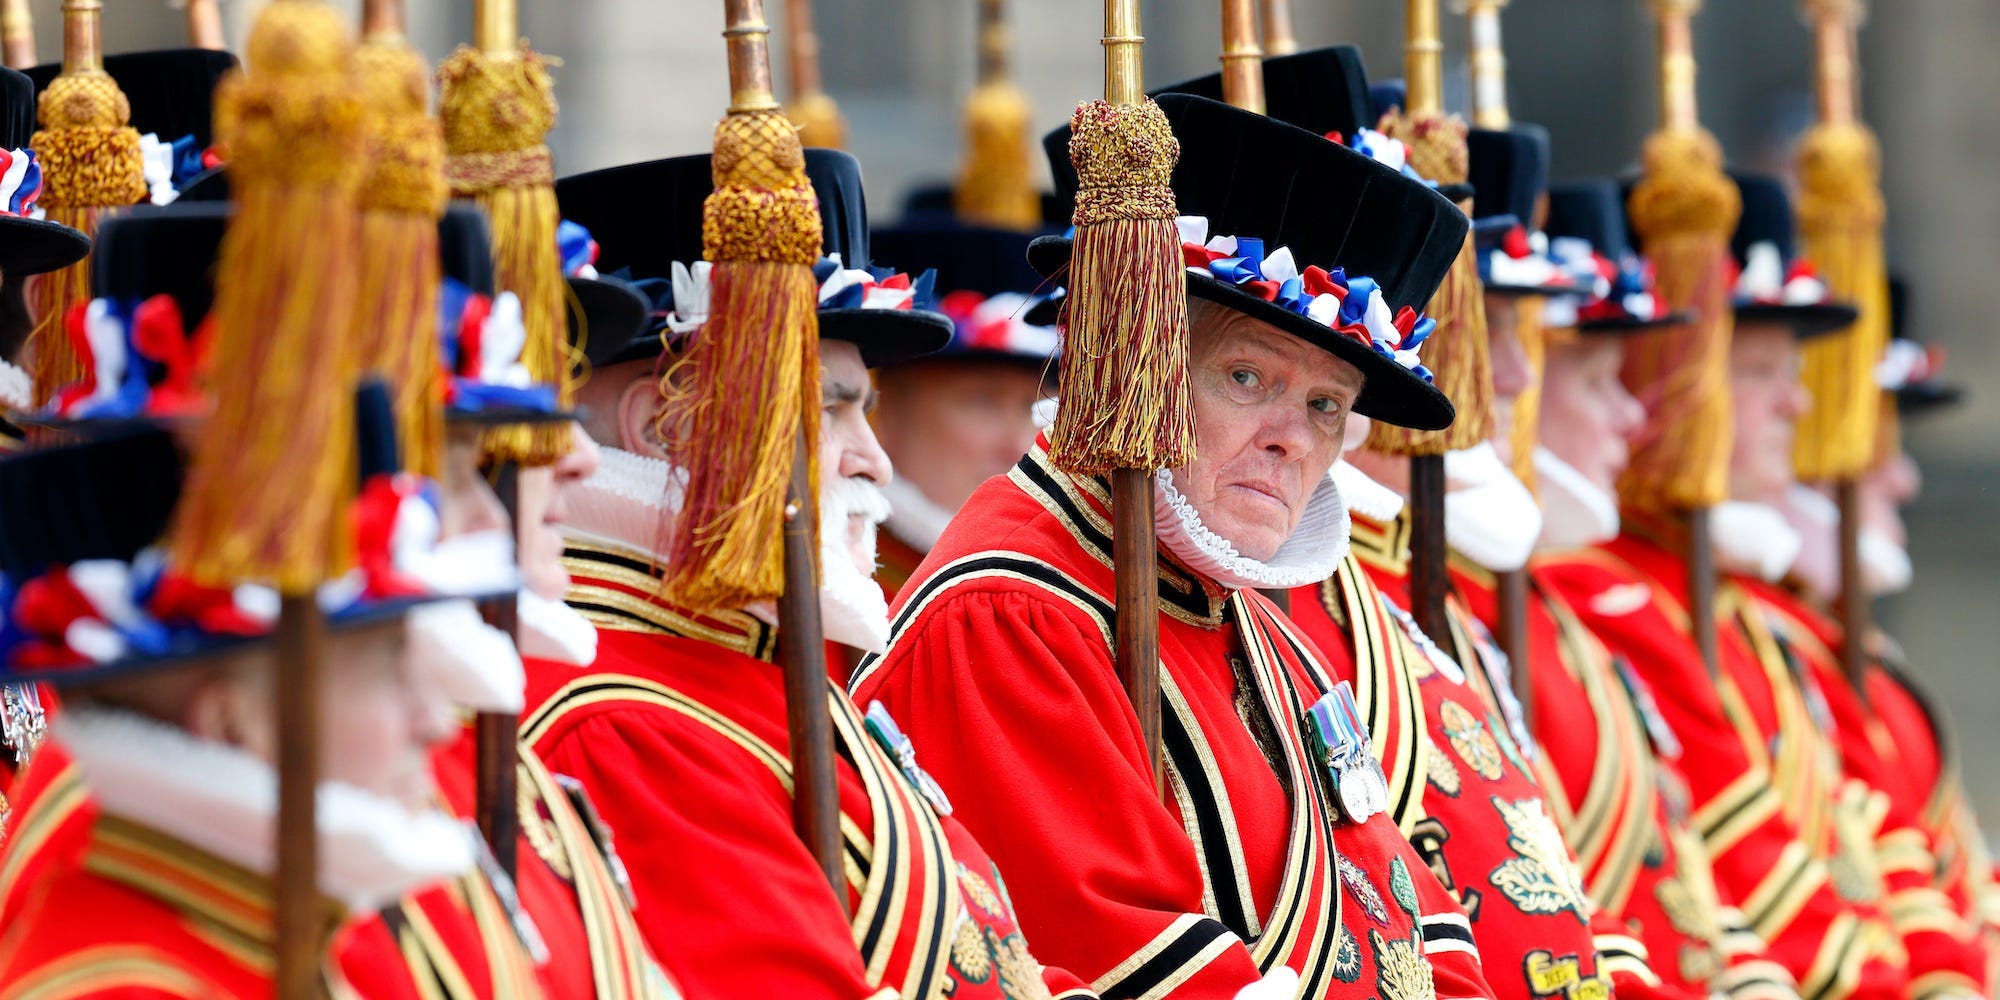 A side view of several Yeomen of the Guard in full red regalia at a royal event. One man peers sideways.